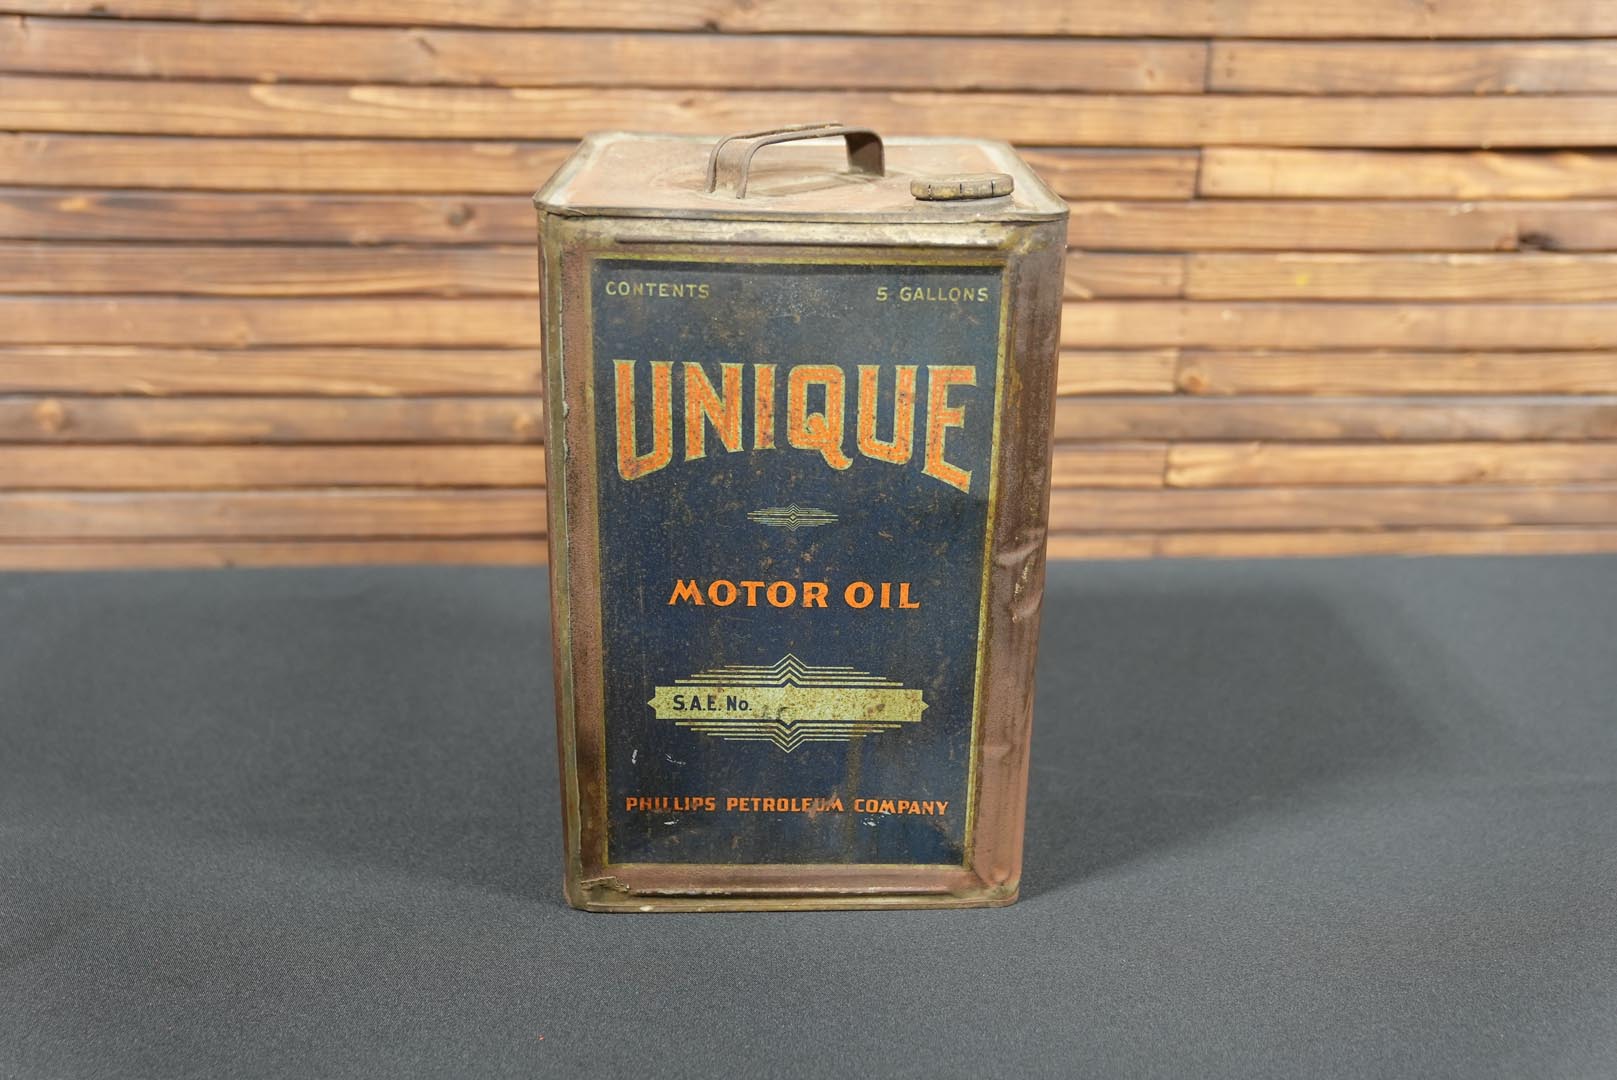  Unique Oil by Phillips 5-Gallo n Oil Can 